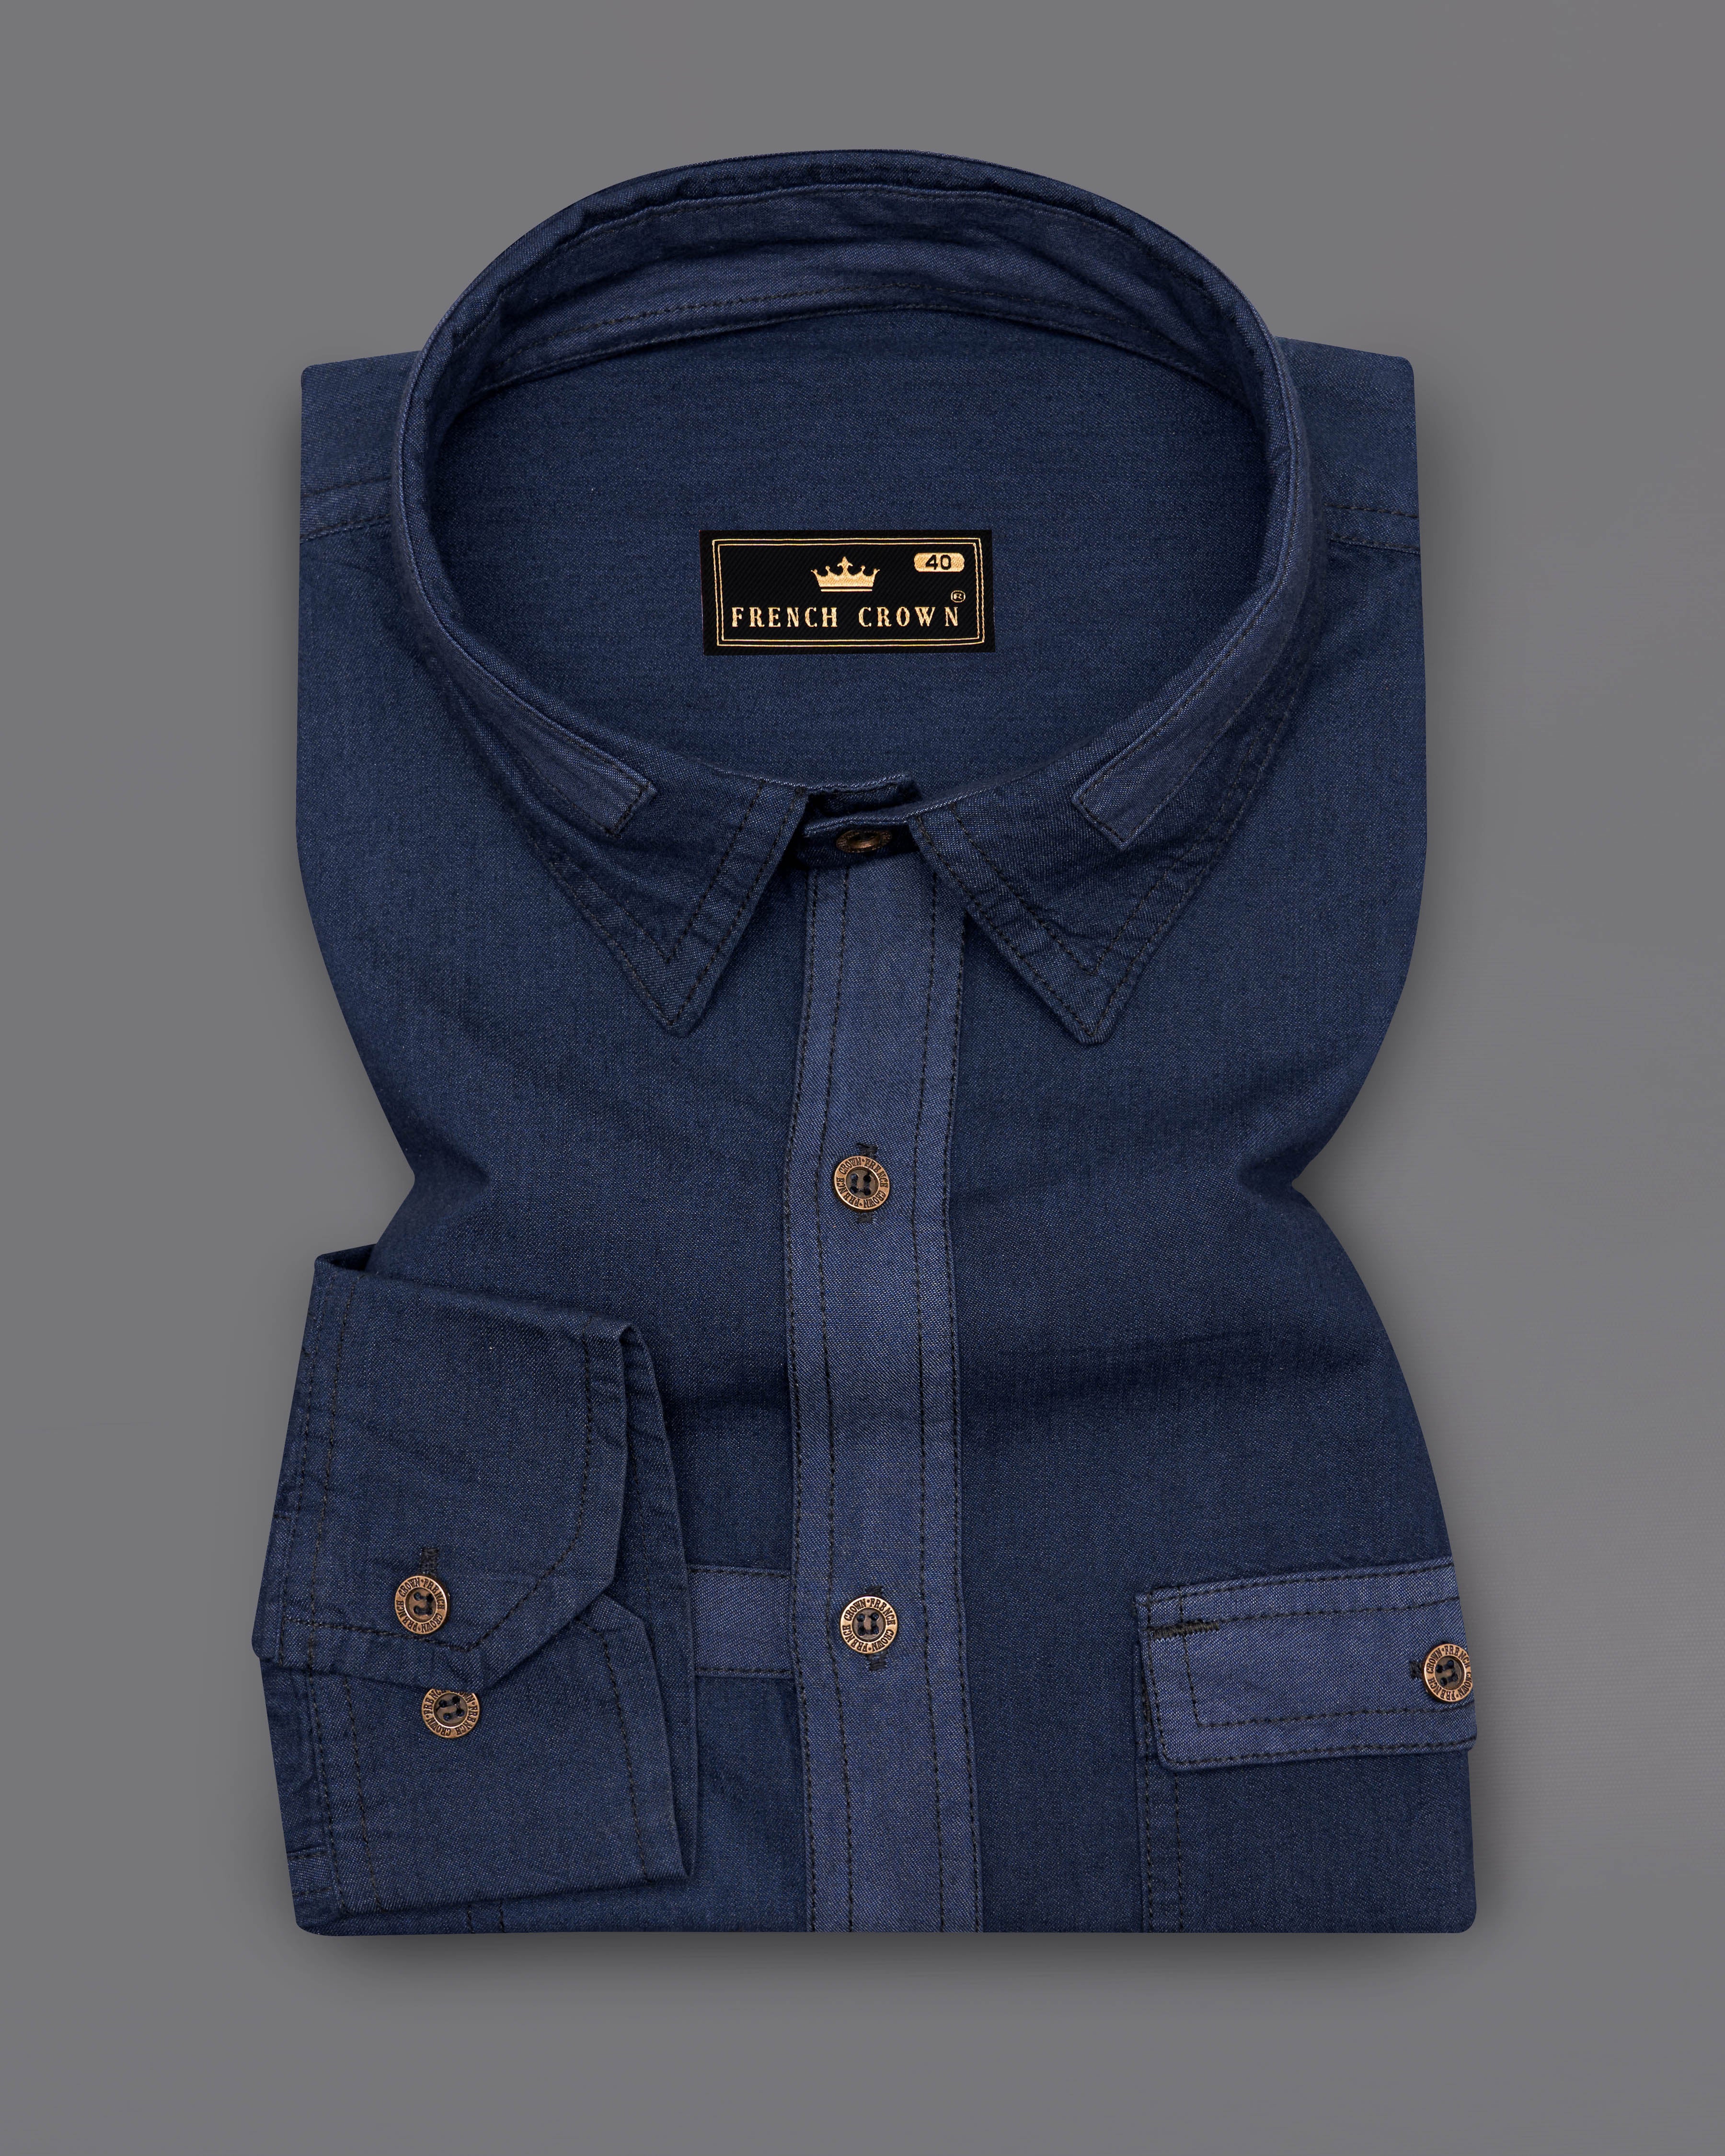 Mirage Blue Chambray Textured Designer Overshirt with Brown Patchwork 9467-MB-38, 9467-MB-H-38, 9467-MB-39, 9467-MB-H-39, 9467-MB-40, 9467-MB-H-40, 9467-MB-42, 9467-MB-H-42, 9467-MB-44, 9467-MB-H-44, 9467-MB-46, 9467-MB-H-46, 9467-MB-48, 9467-MB-H-48, 9467-MB-50, 9467-MB-H-50, 9467-MB-52, 9467-MB-H-52